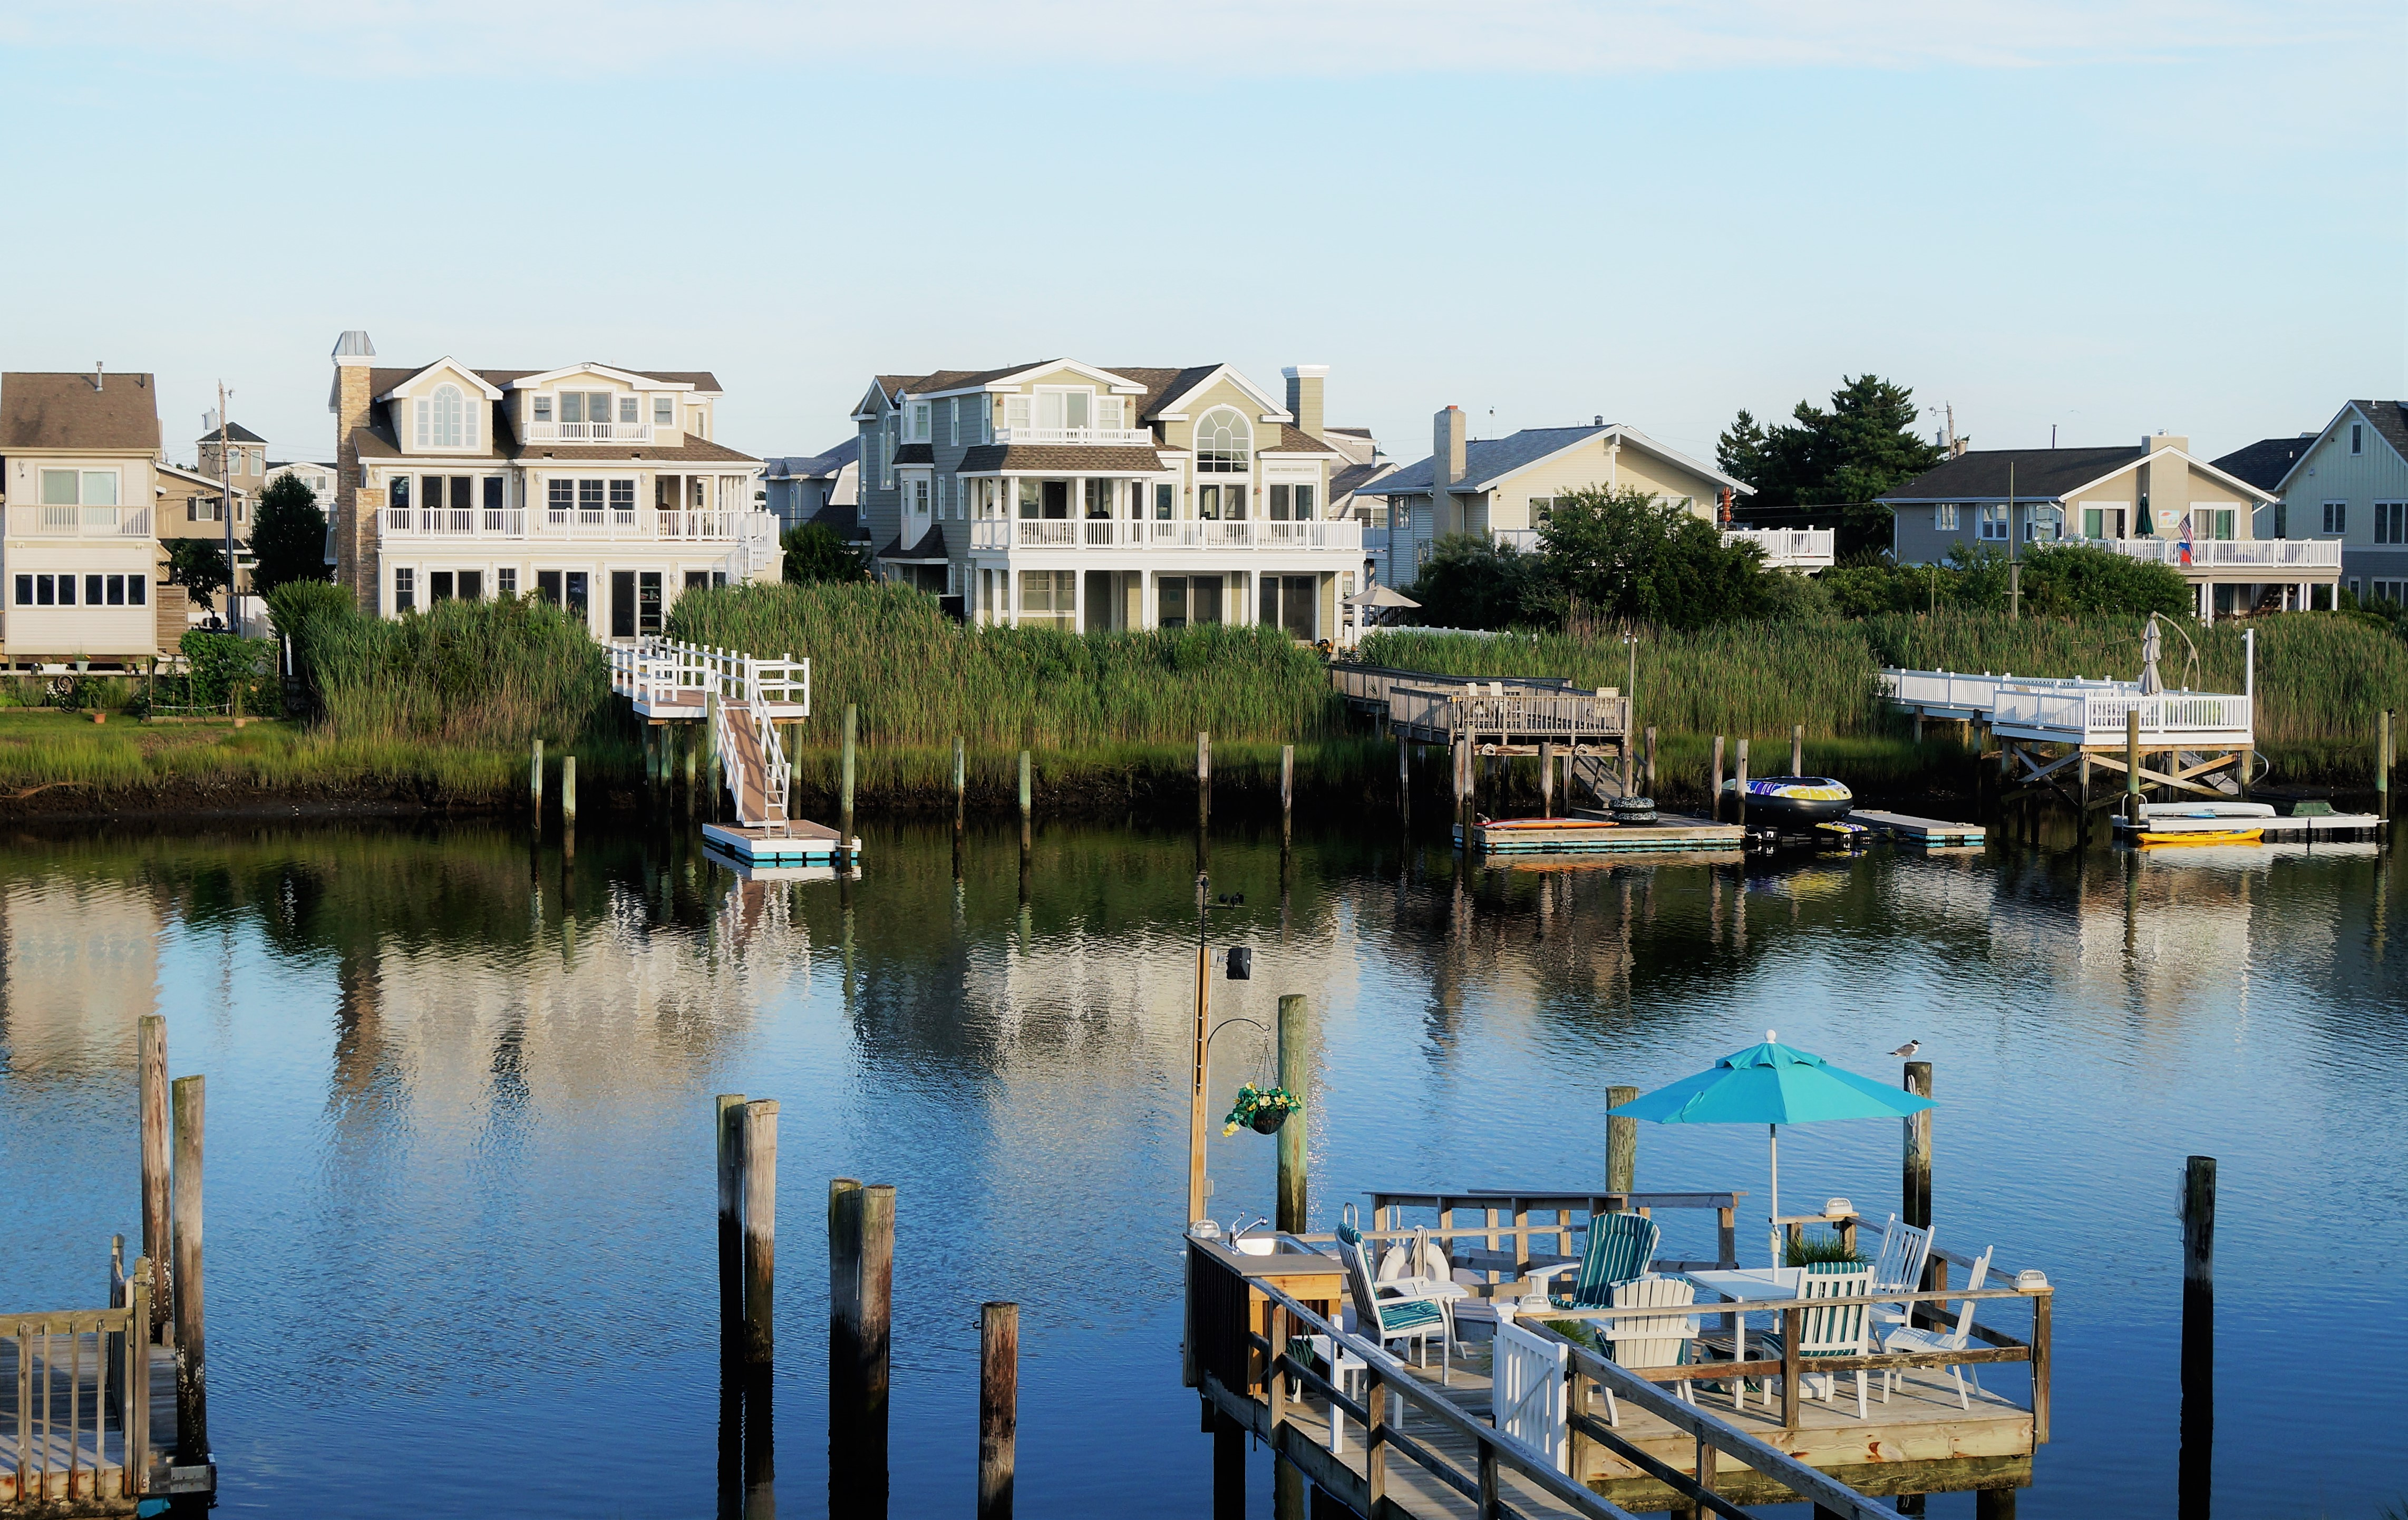 7 Steps to Selling Your OCNJ Rental Property